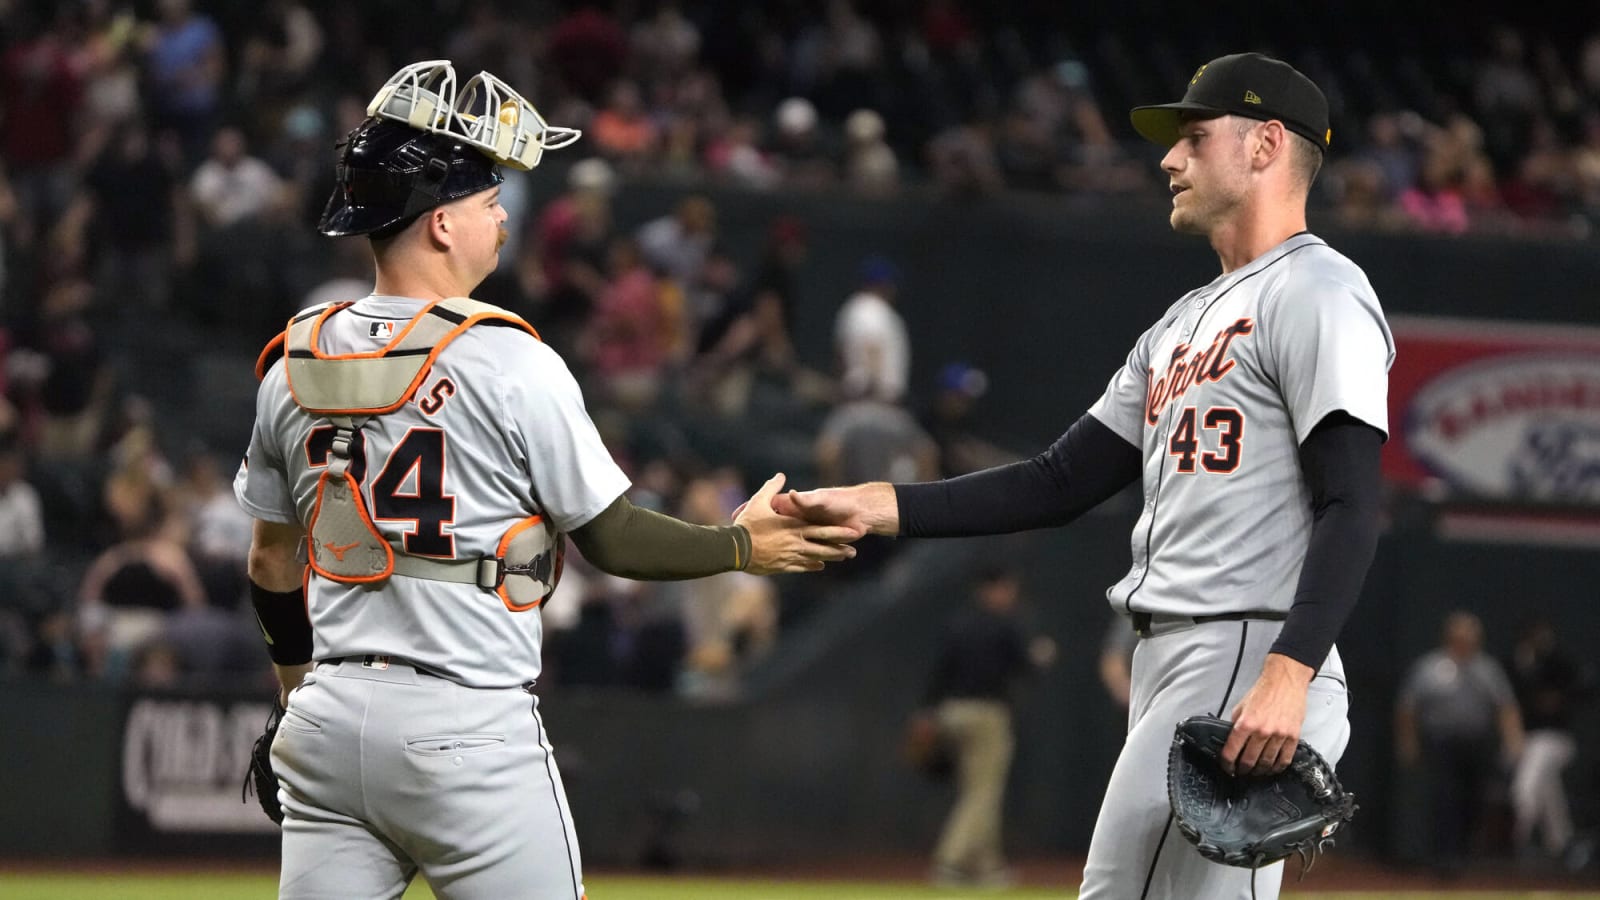 Tigers Unleash Offensive Onslaught, Hand Diamondbacks a 13-0 Night to Forget